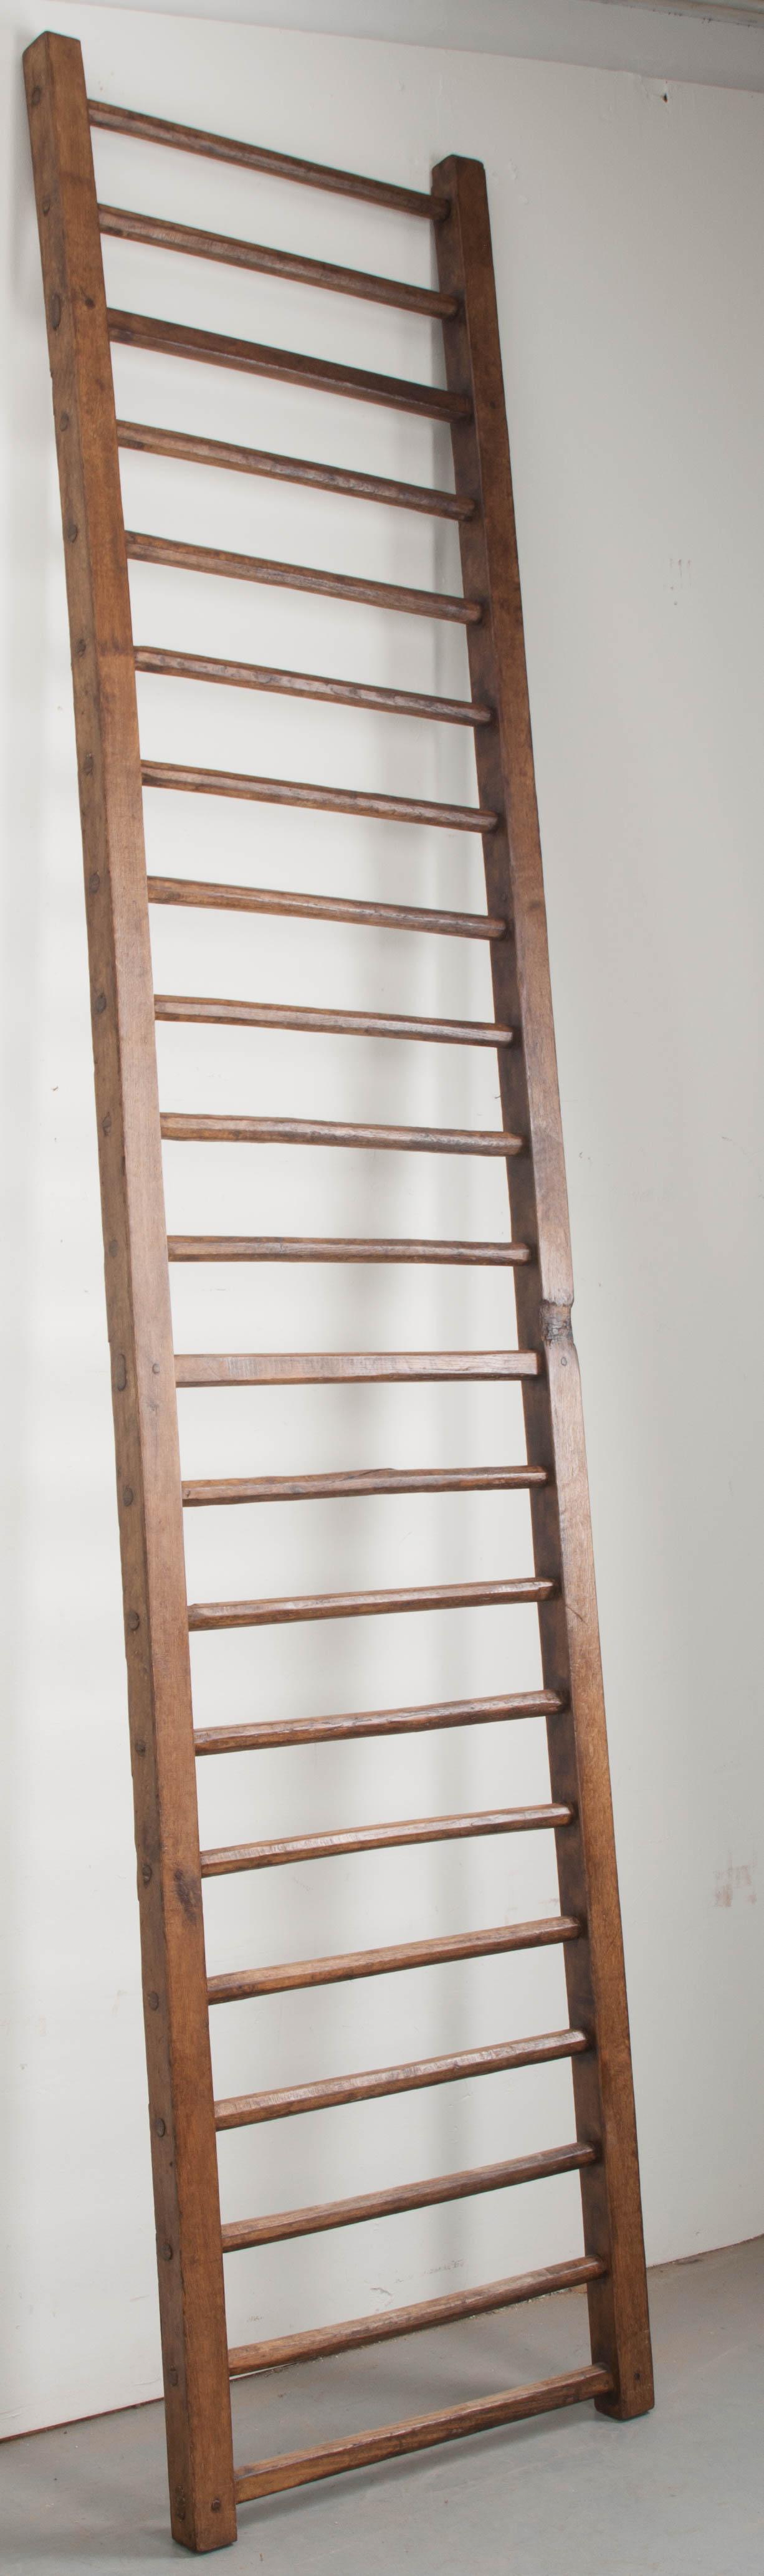 Hand-Carved English 19th Century Country Ladder